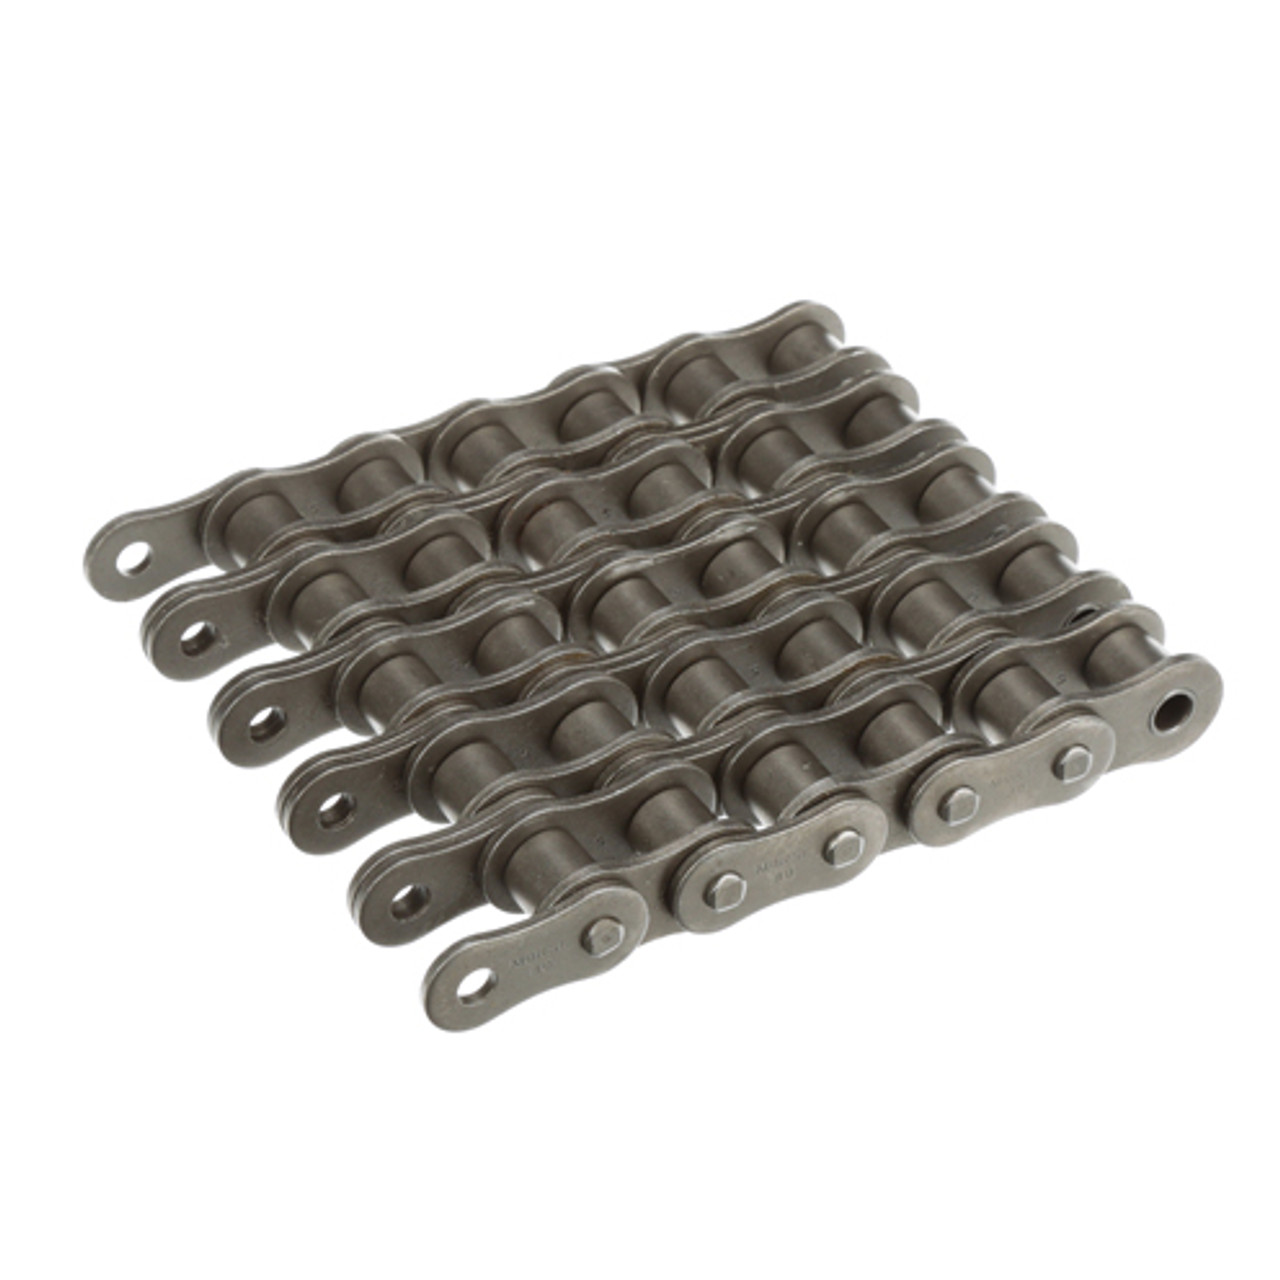 Riveted Roller Chain - Five Row - 10' Box  DRV-100Z-5R-10FT